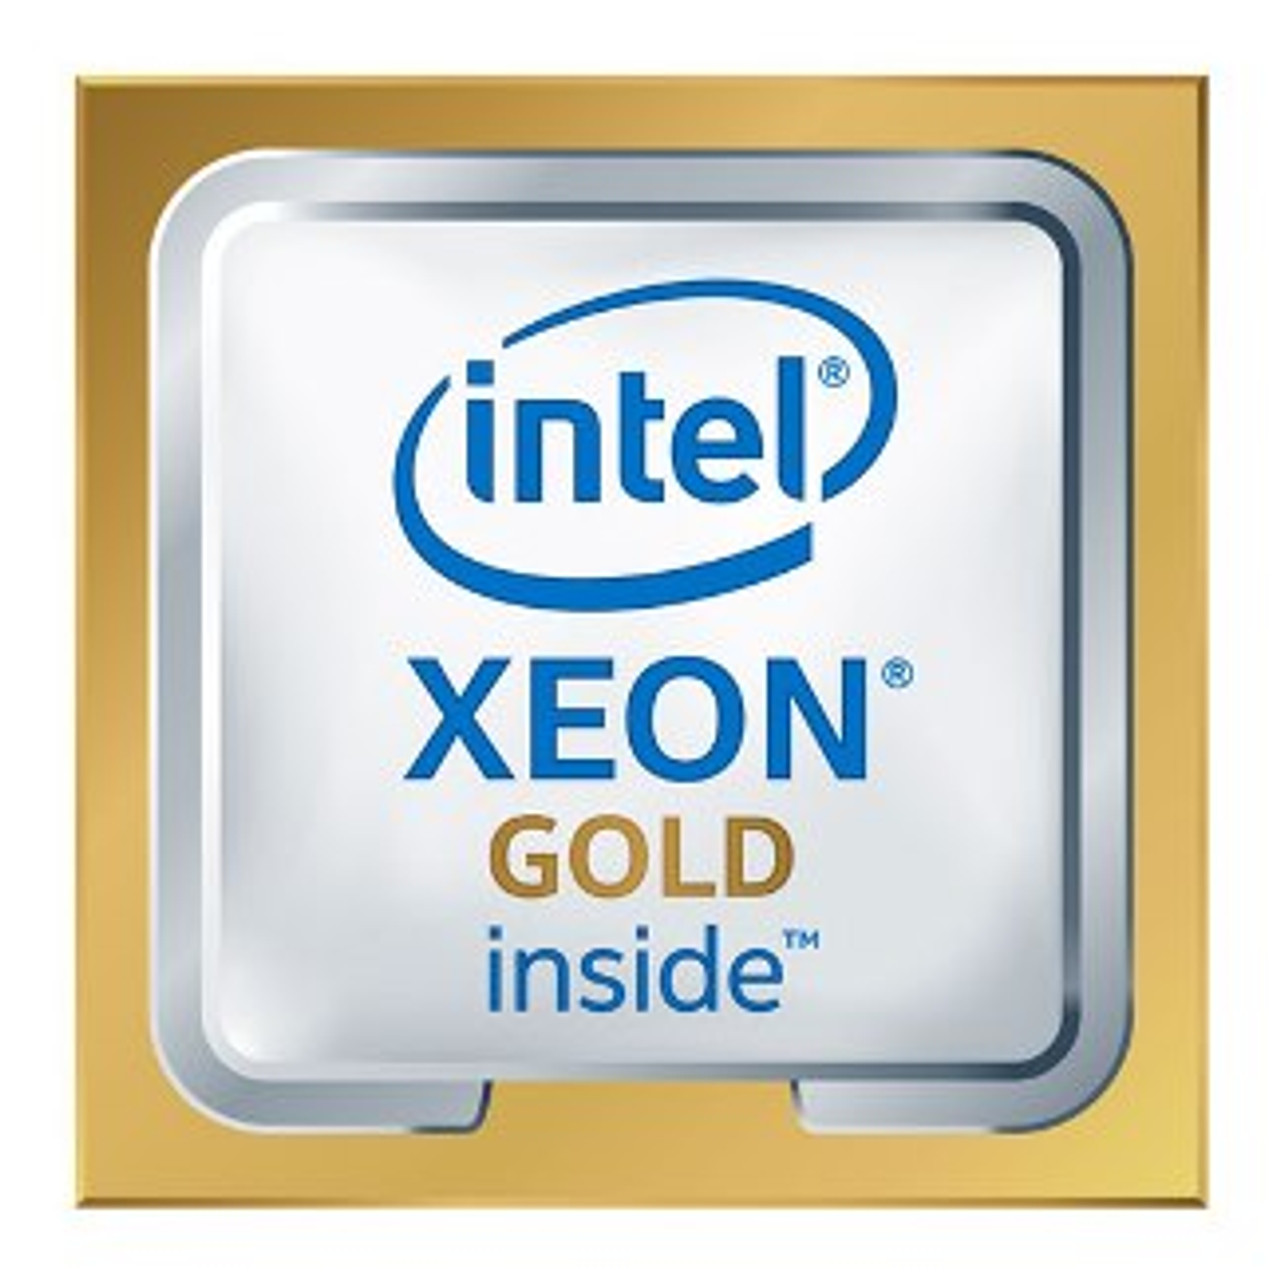 INTEL SRGZC Xeon Gold 6226r 16-core 2.90ghz 10.4gt/s Upi Speed 22mb L3 Cache Socket Fclga3647 14nm 150w Processor Only